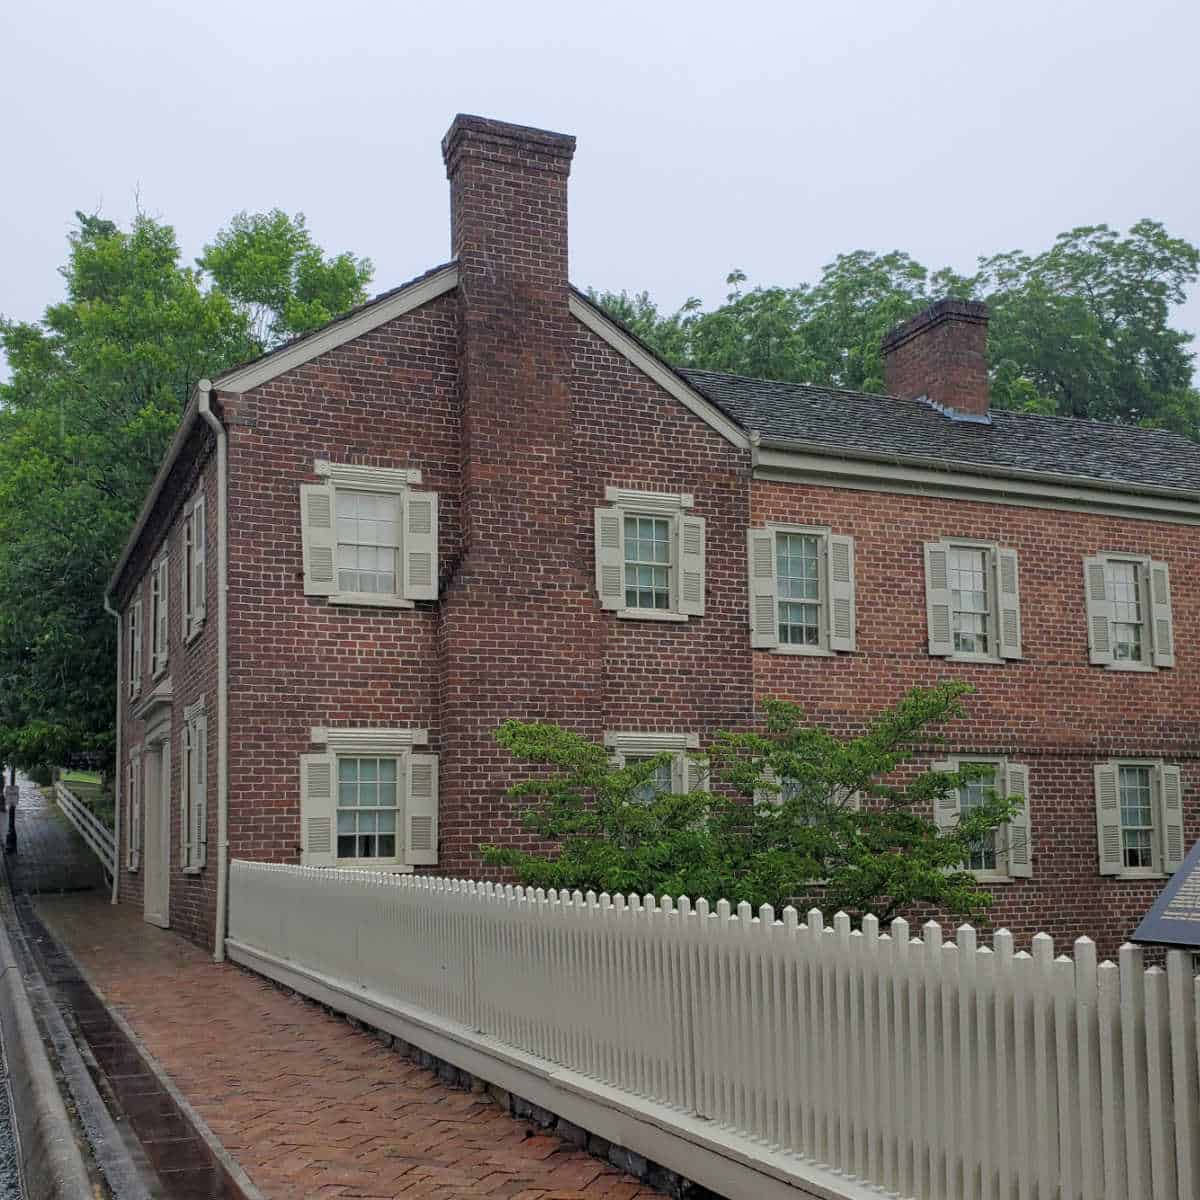 path leading to a historic brick home that is 2 stories